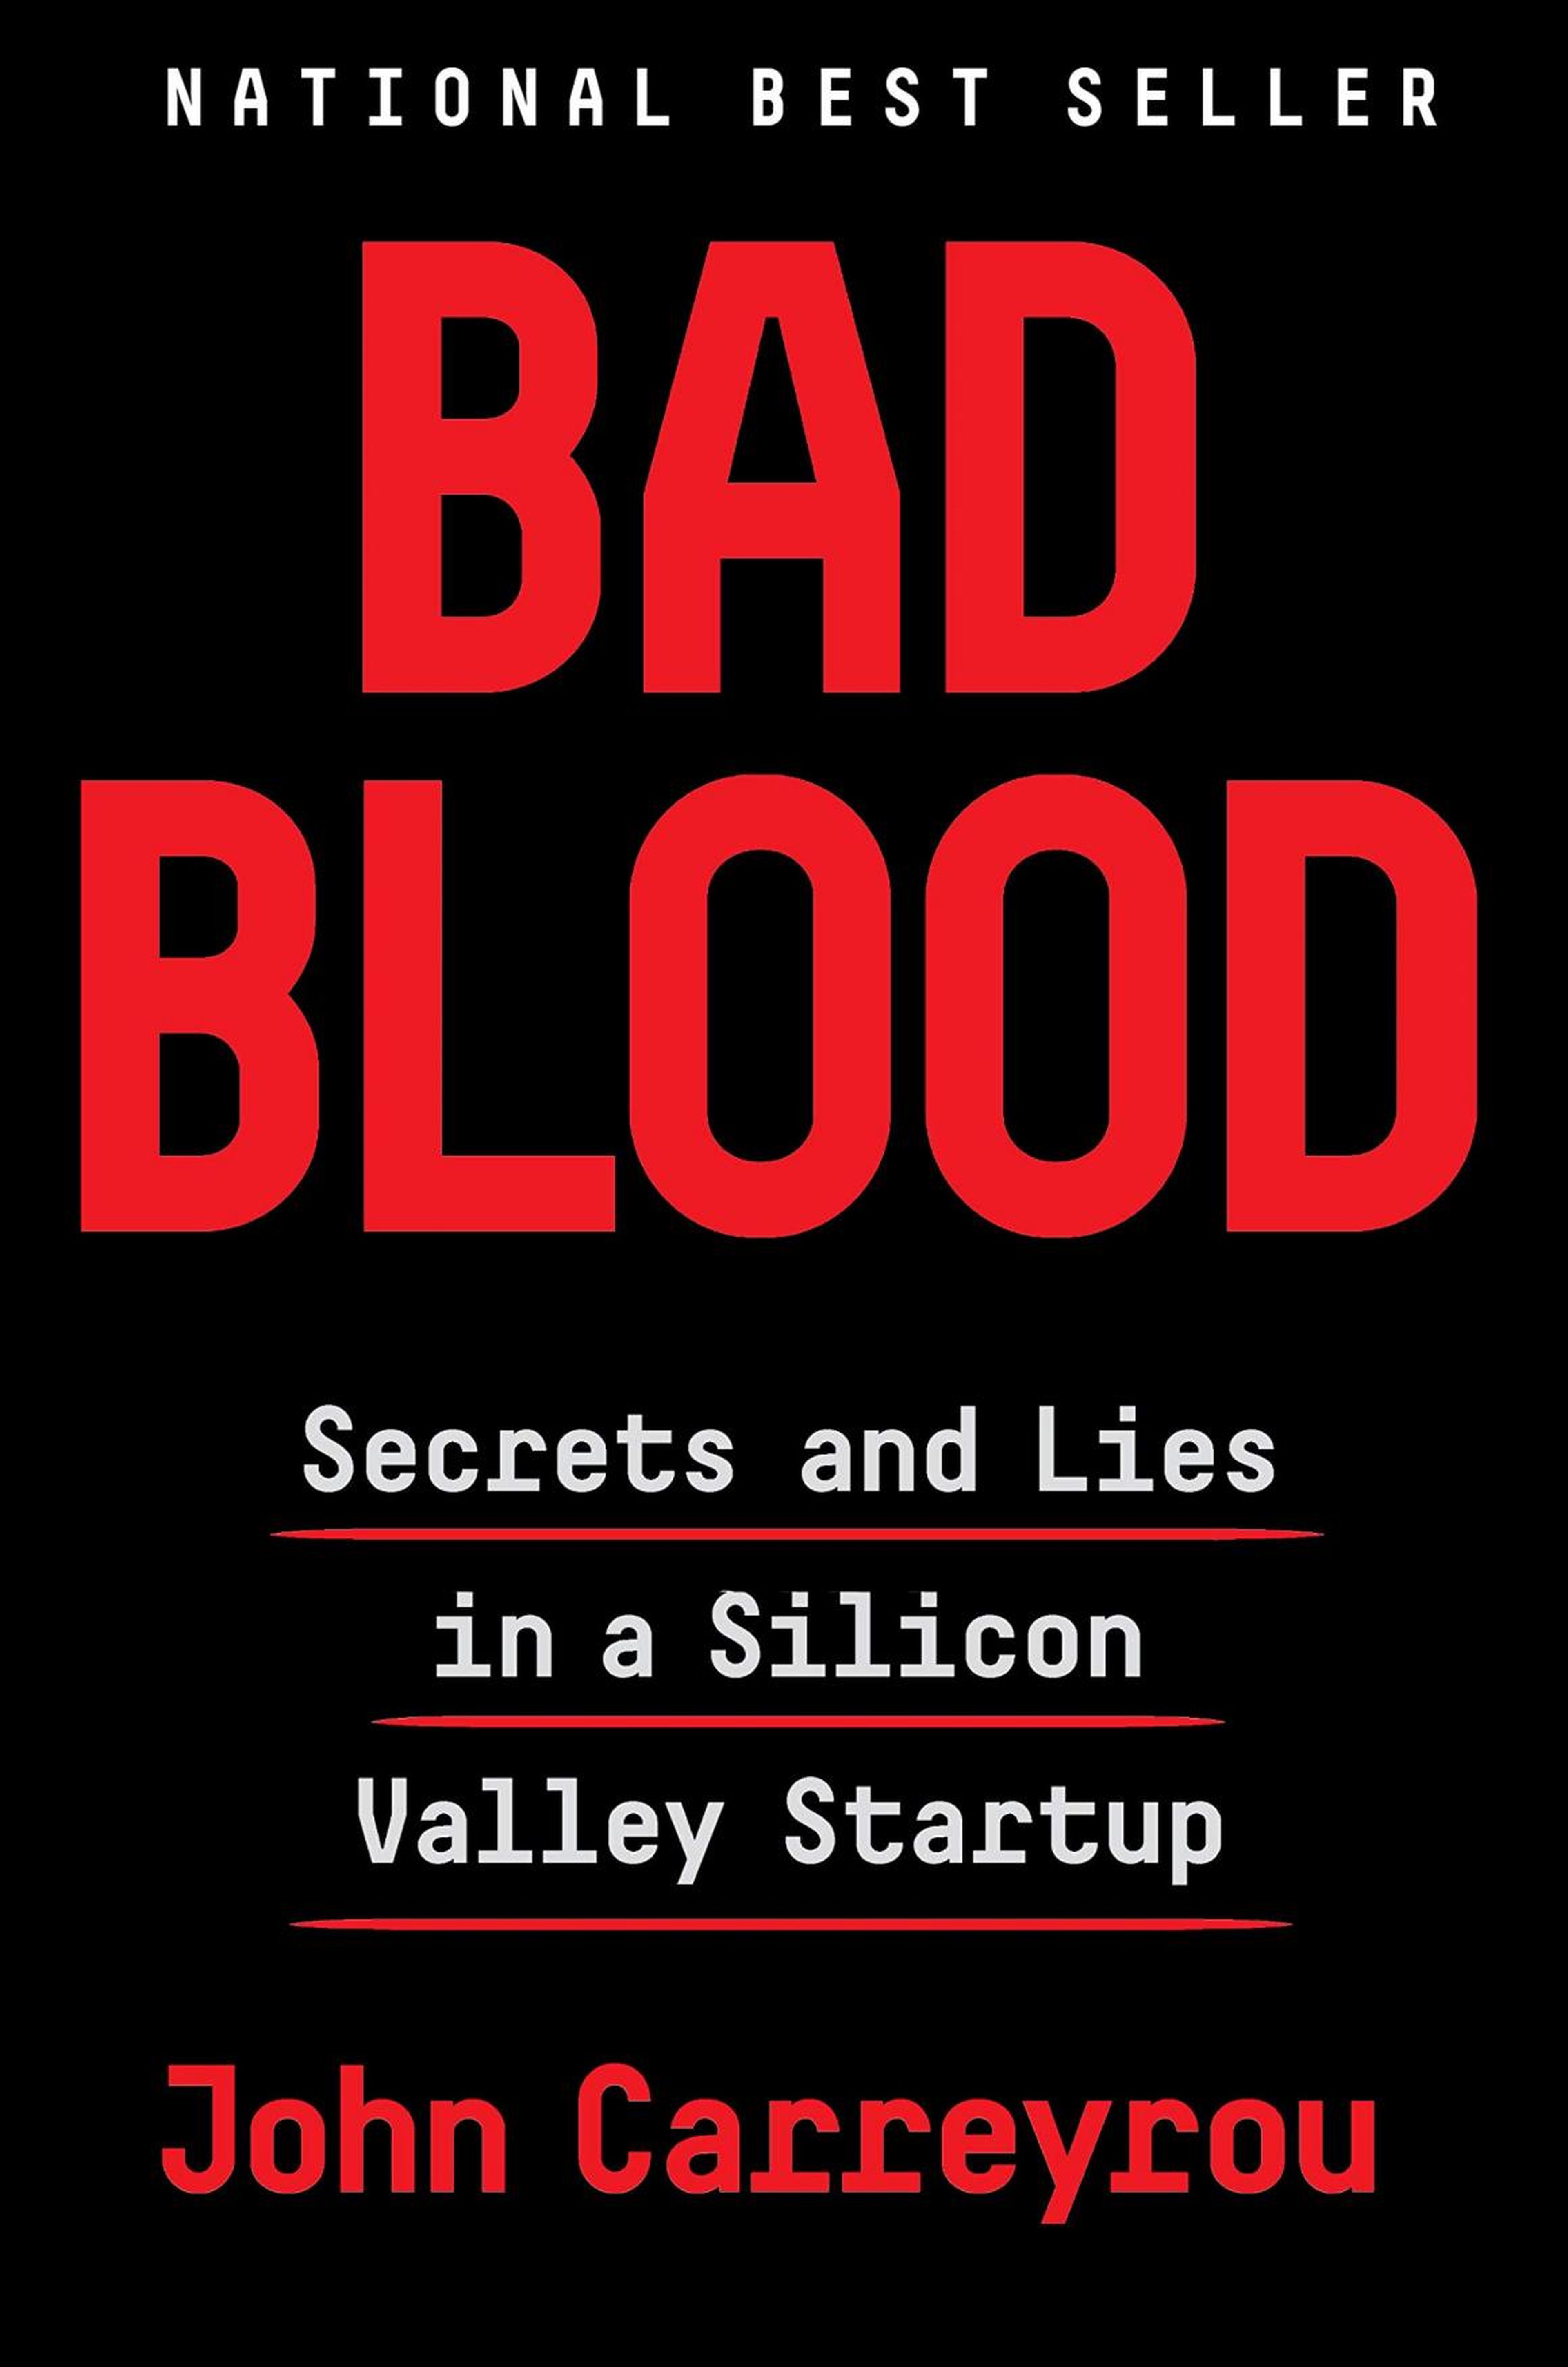 "Bad Blood: Secrets and Lies in a Silicon Valley Startup" by John Carreyou